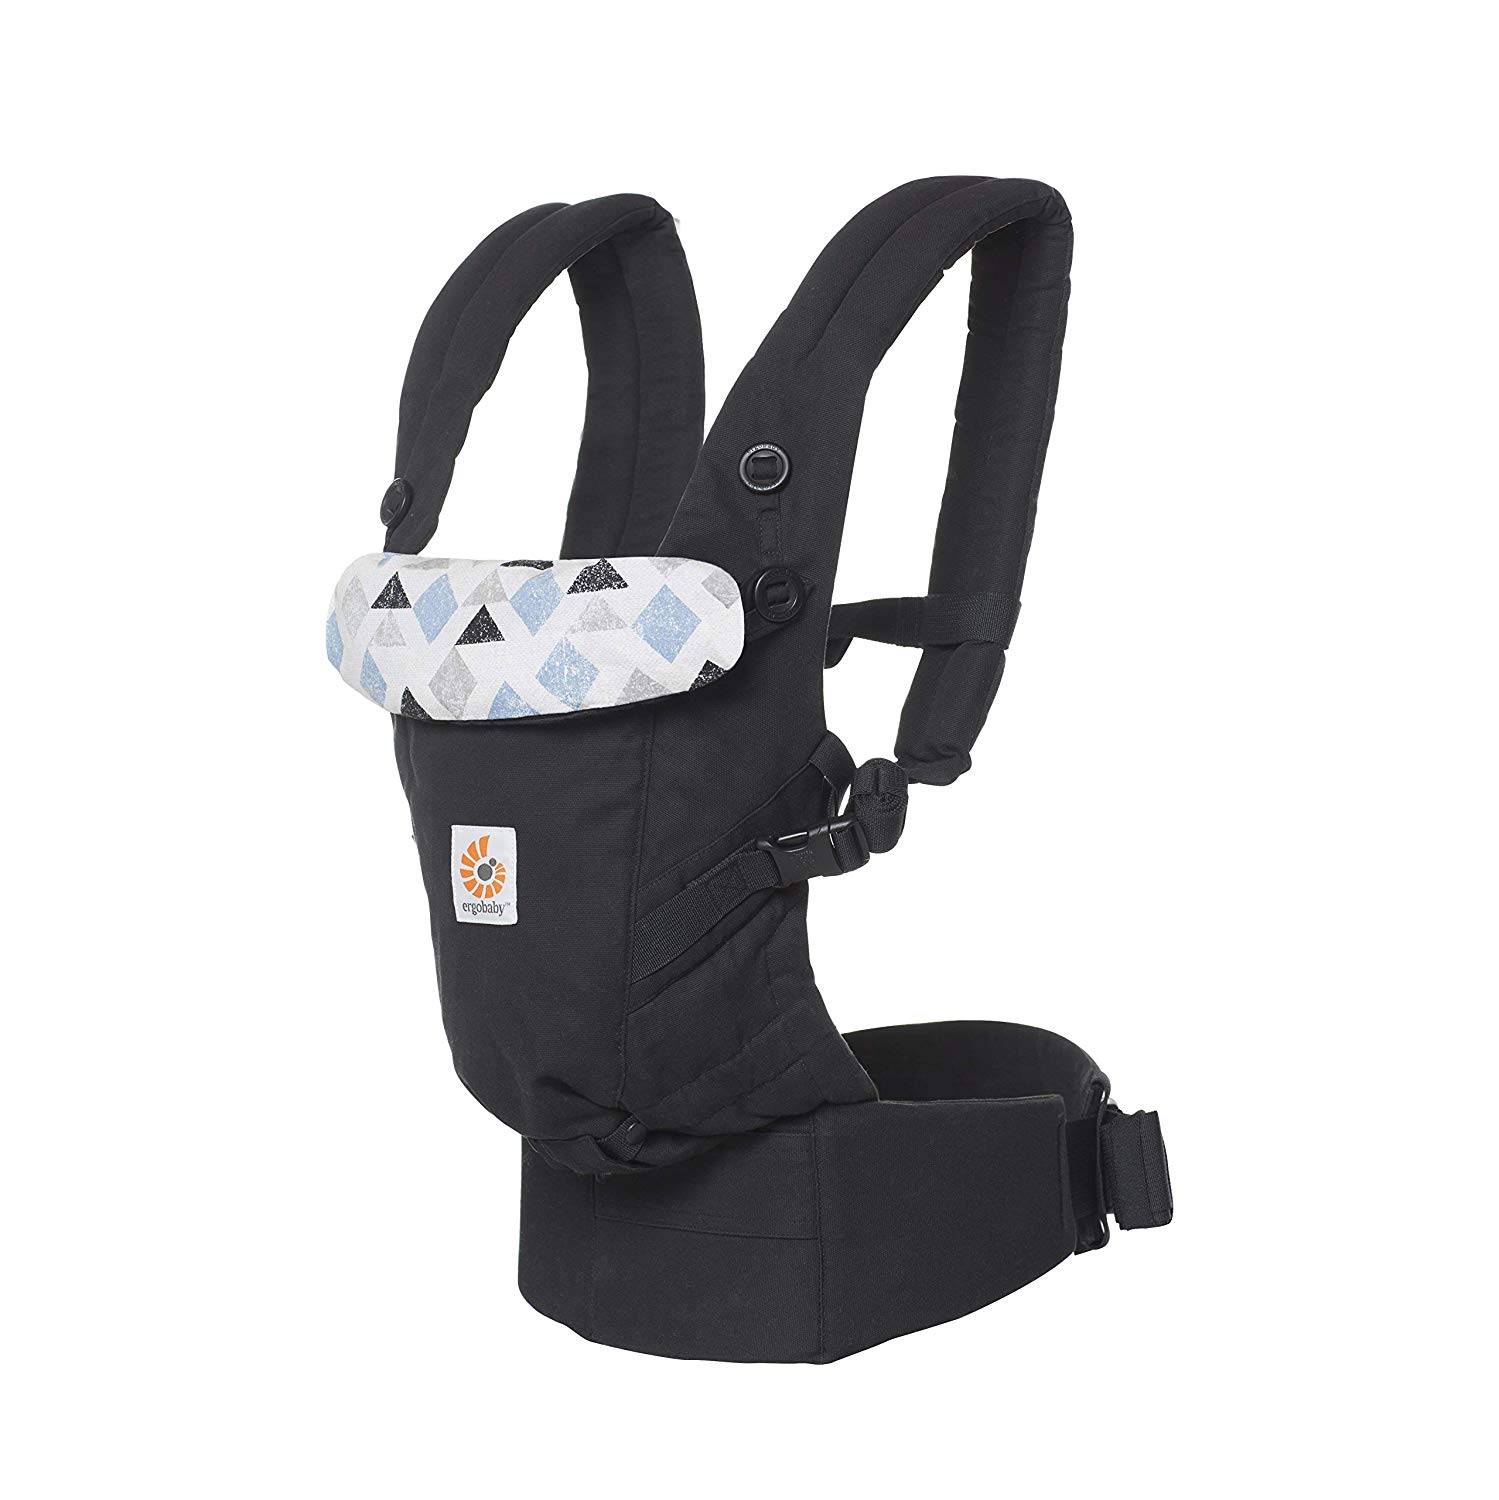 Ergobaby baby carrier for newborns, Adapt Grey 3-in-1 baby carrier system Ergonomic, baby carrier bag, front carrier